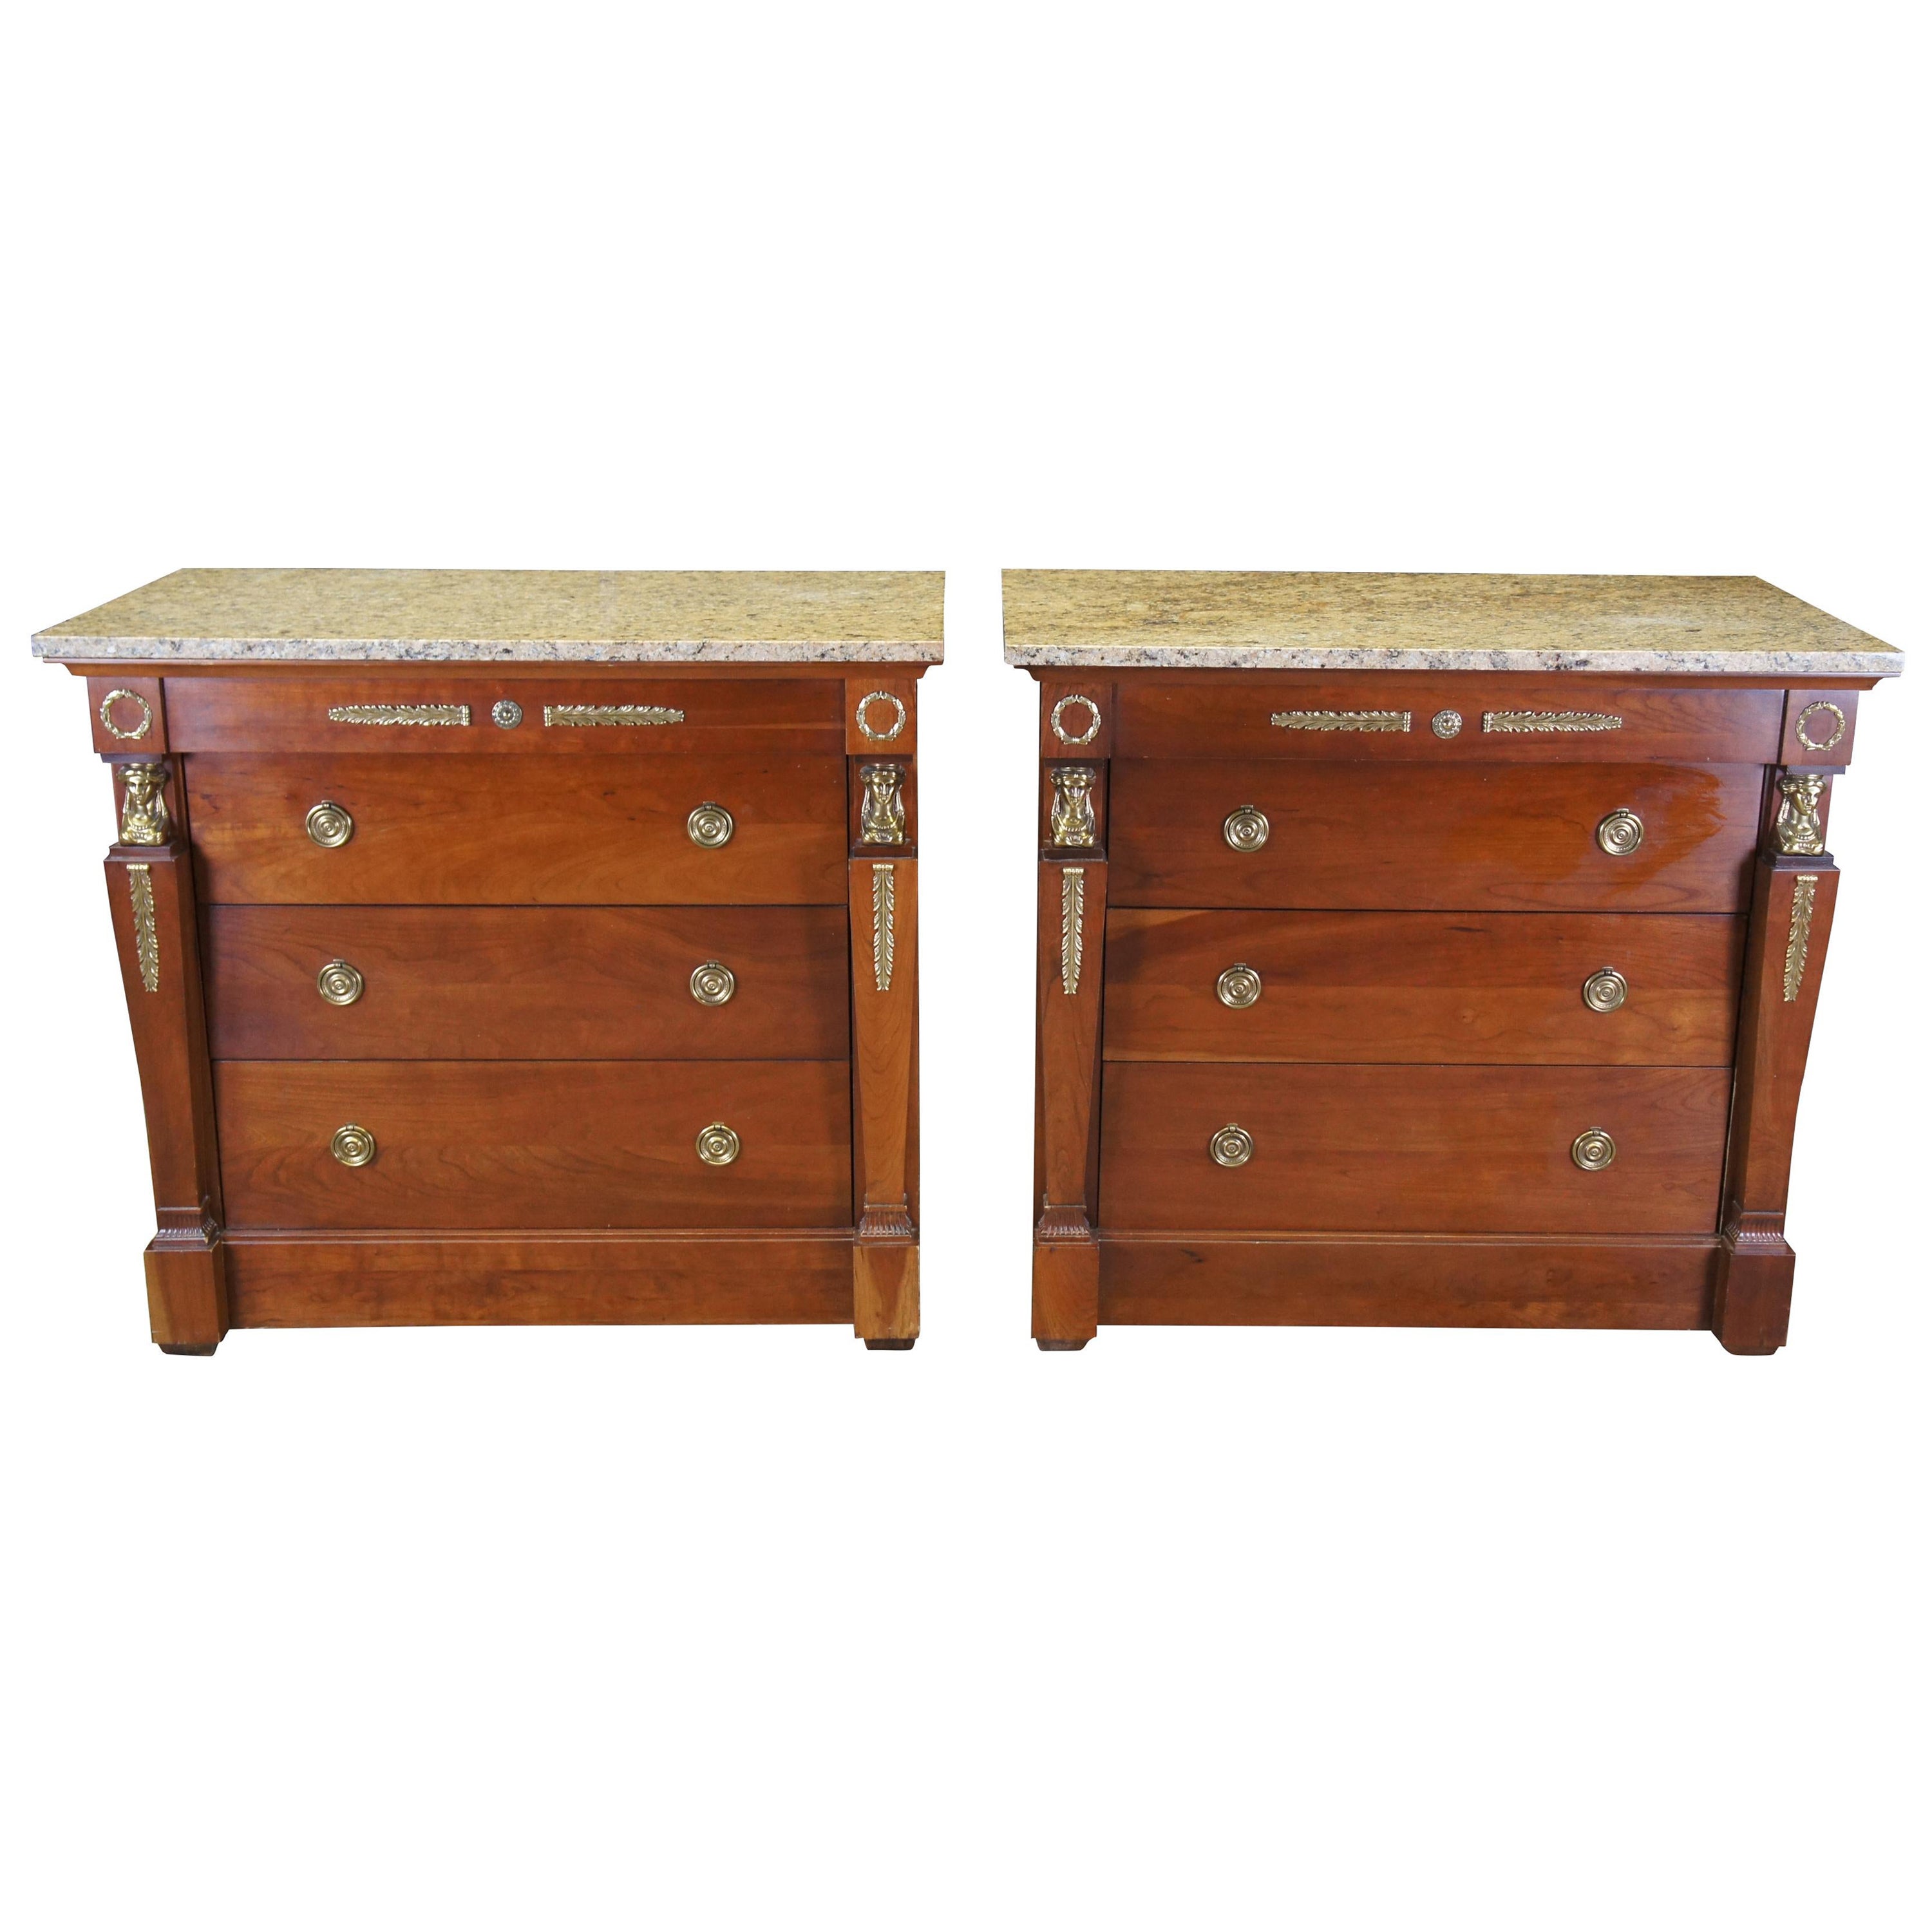 2 Commodes de nuit Harden French Empire Egyptian Revive Cherry Marble Commodes Chest